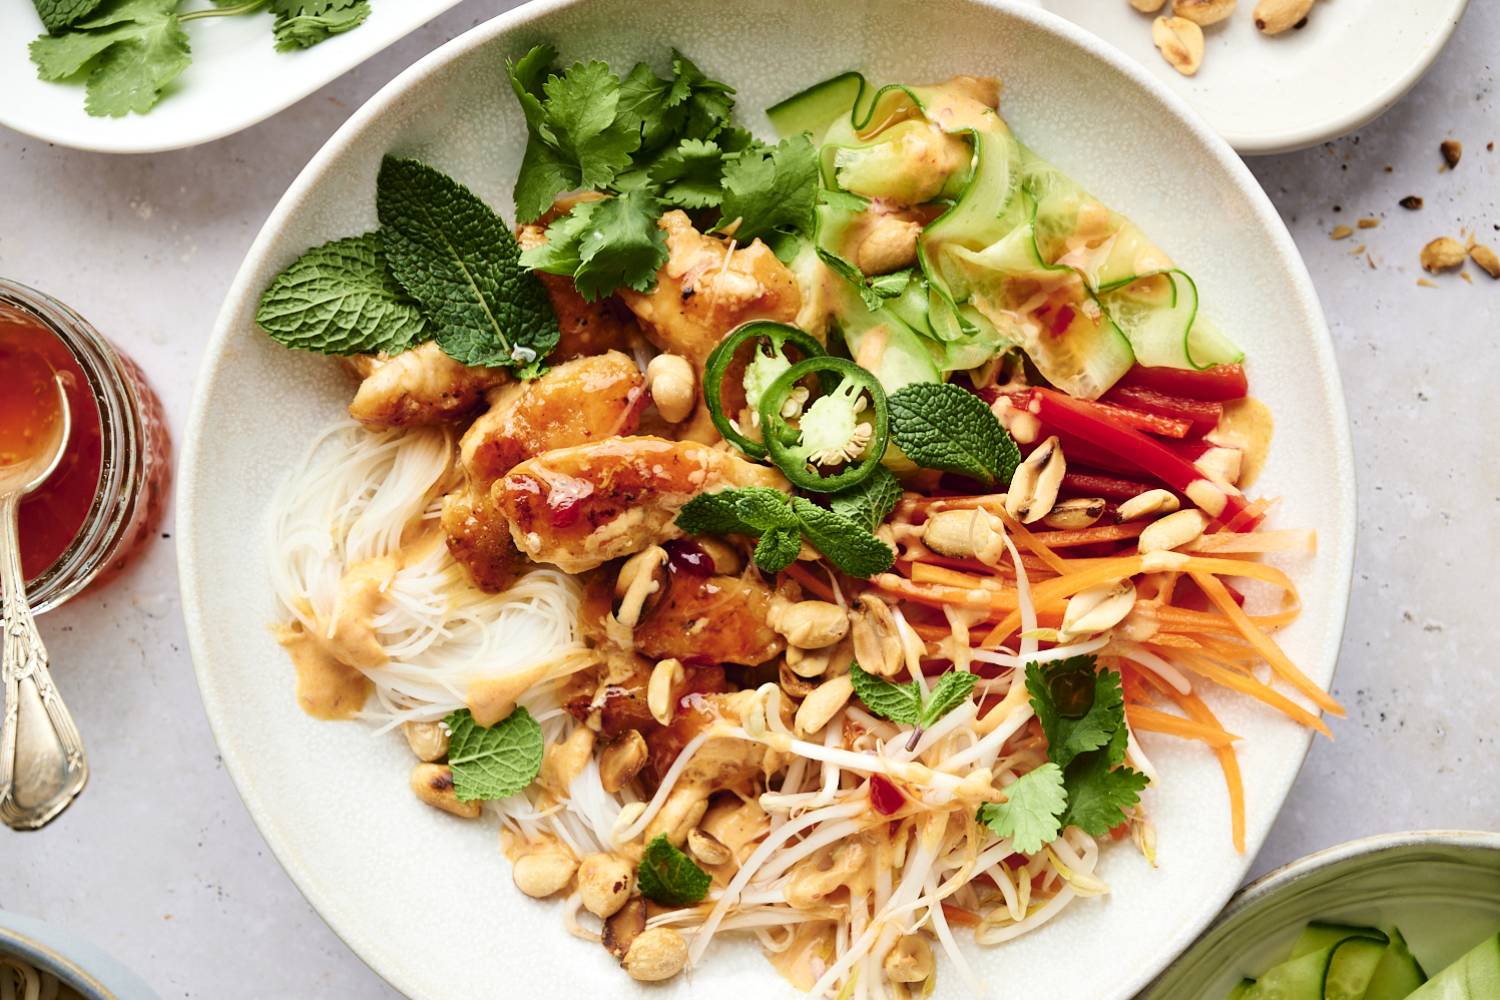 Vermicelli noodles bowls with sweet chili chicken, noodles, carrots, bean sprouts, cucumbers, carrots, peanuts, and fresh herbs.